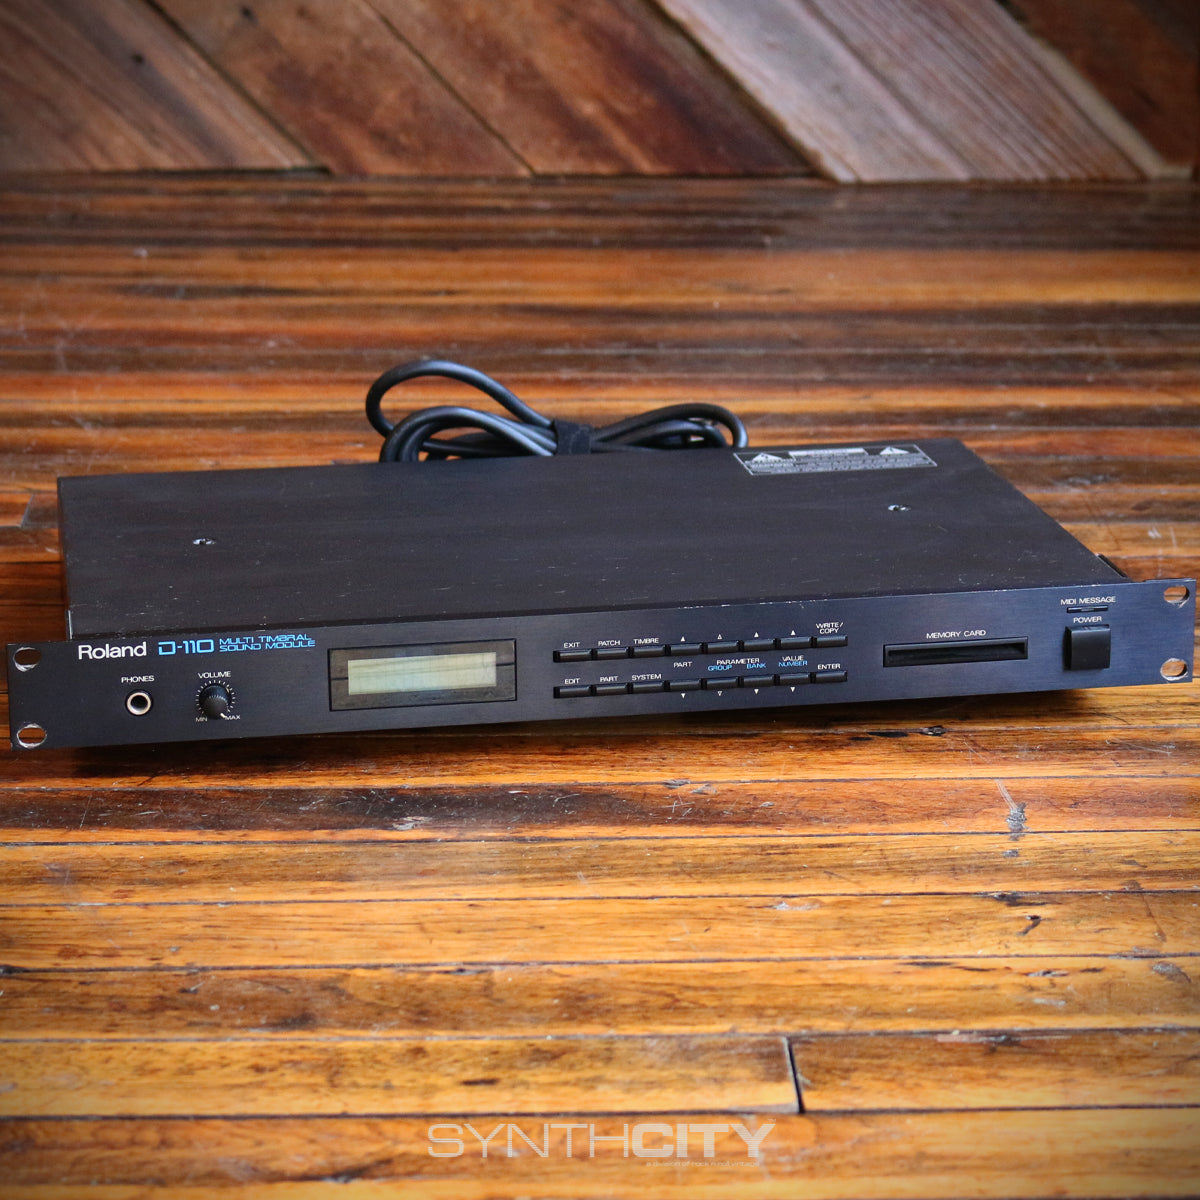 Roland D-110 Multi Timbral Sound Module – Rock N Roll Vintage